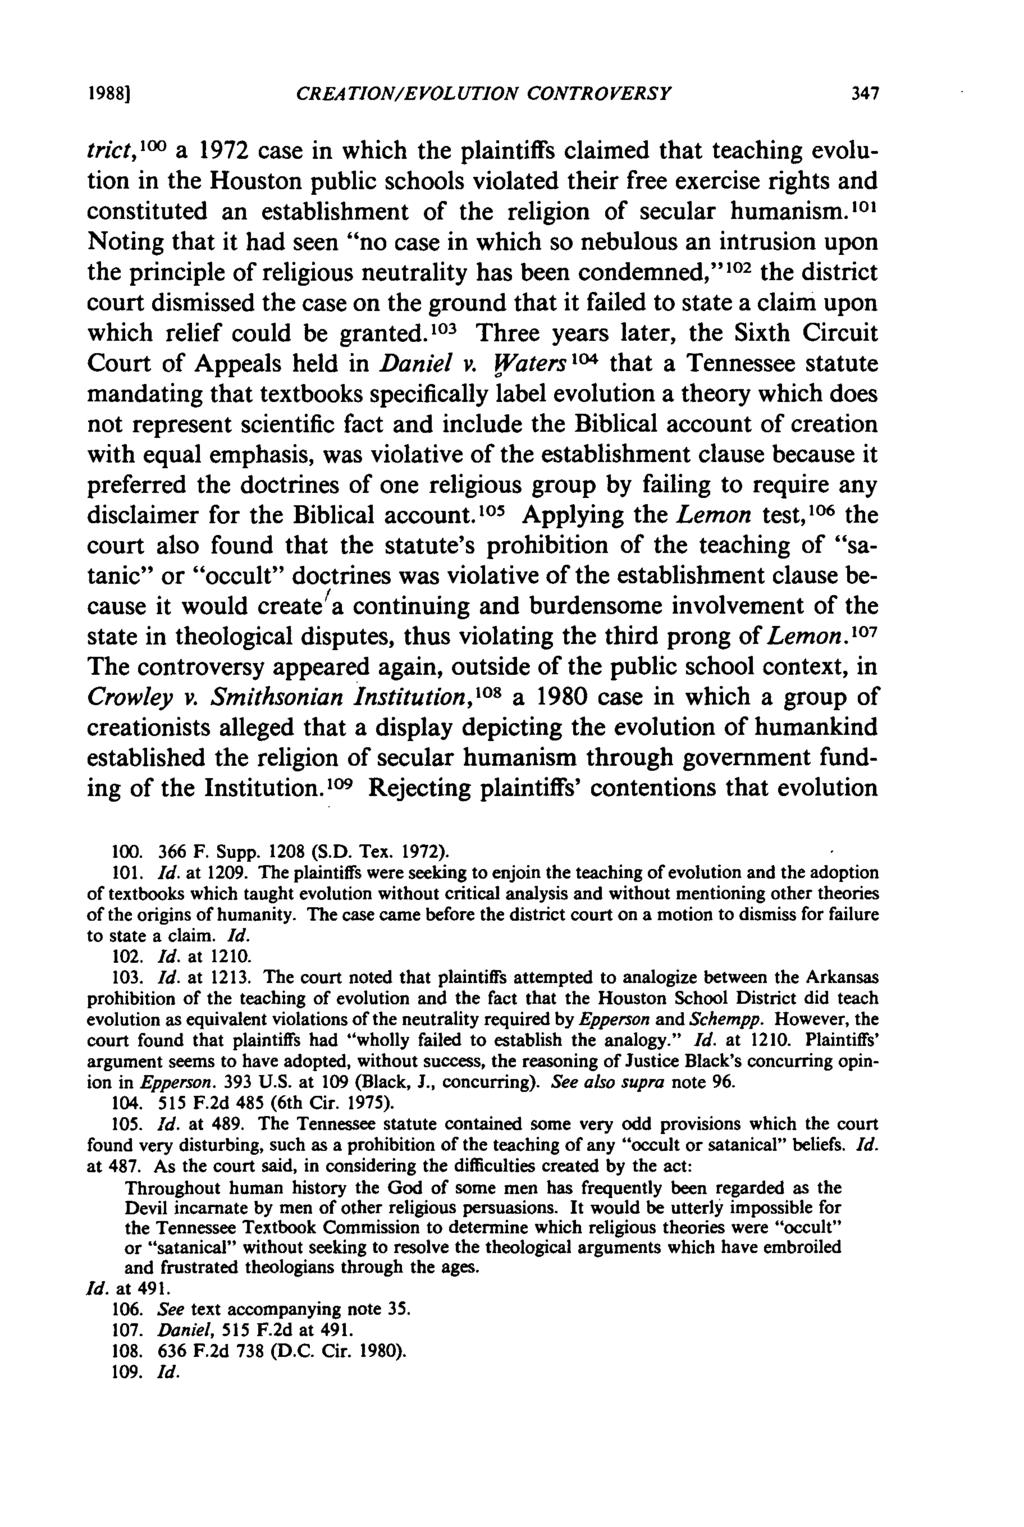 CREATIONIEVOLUTION CONTROVERSY trict, 100 a 1972 case in which the plaintiffs claimed that teaching evolution in the Houston public schools violated their free exercise rights and constituted an